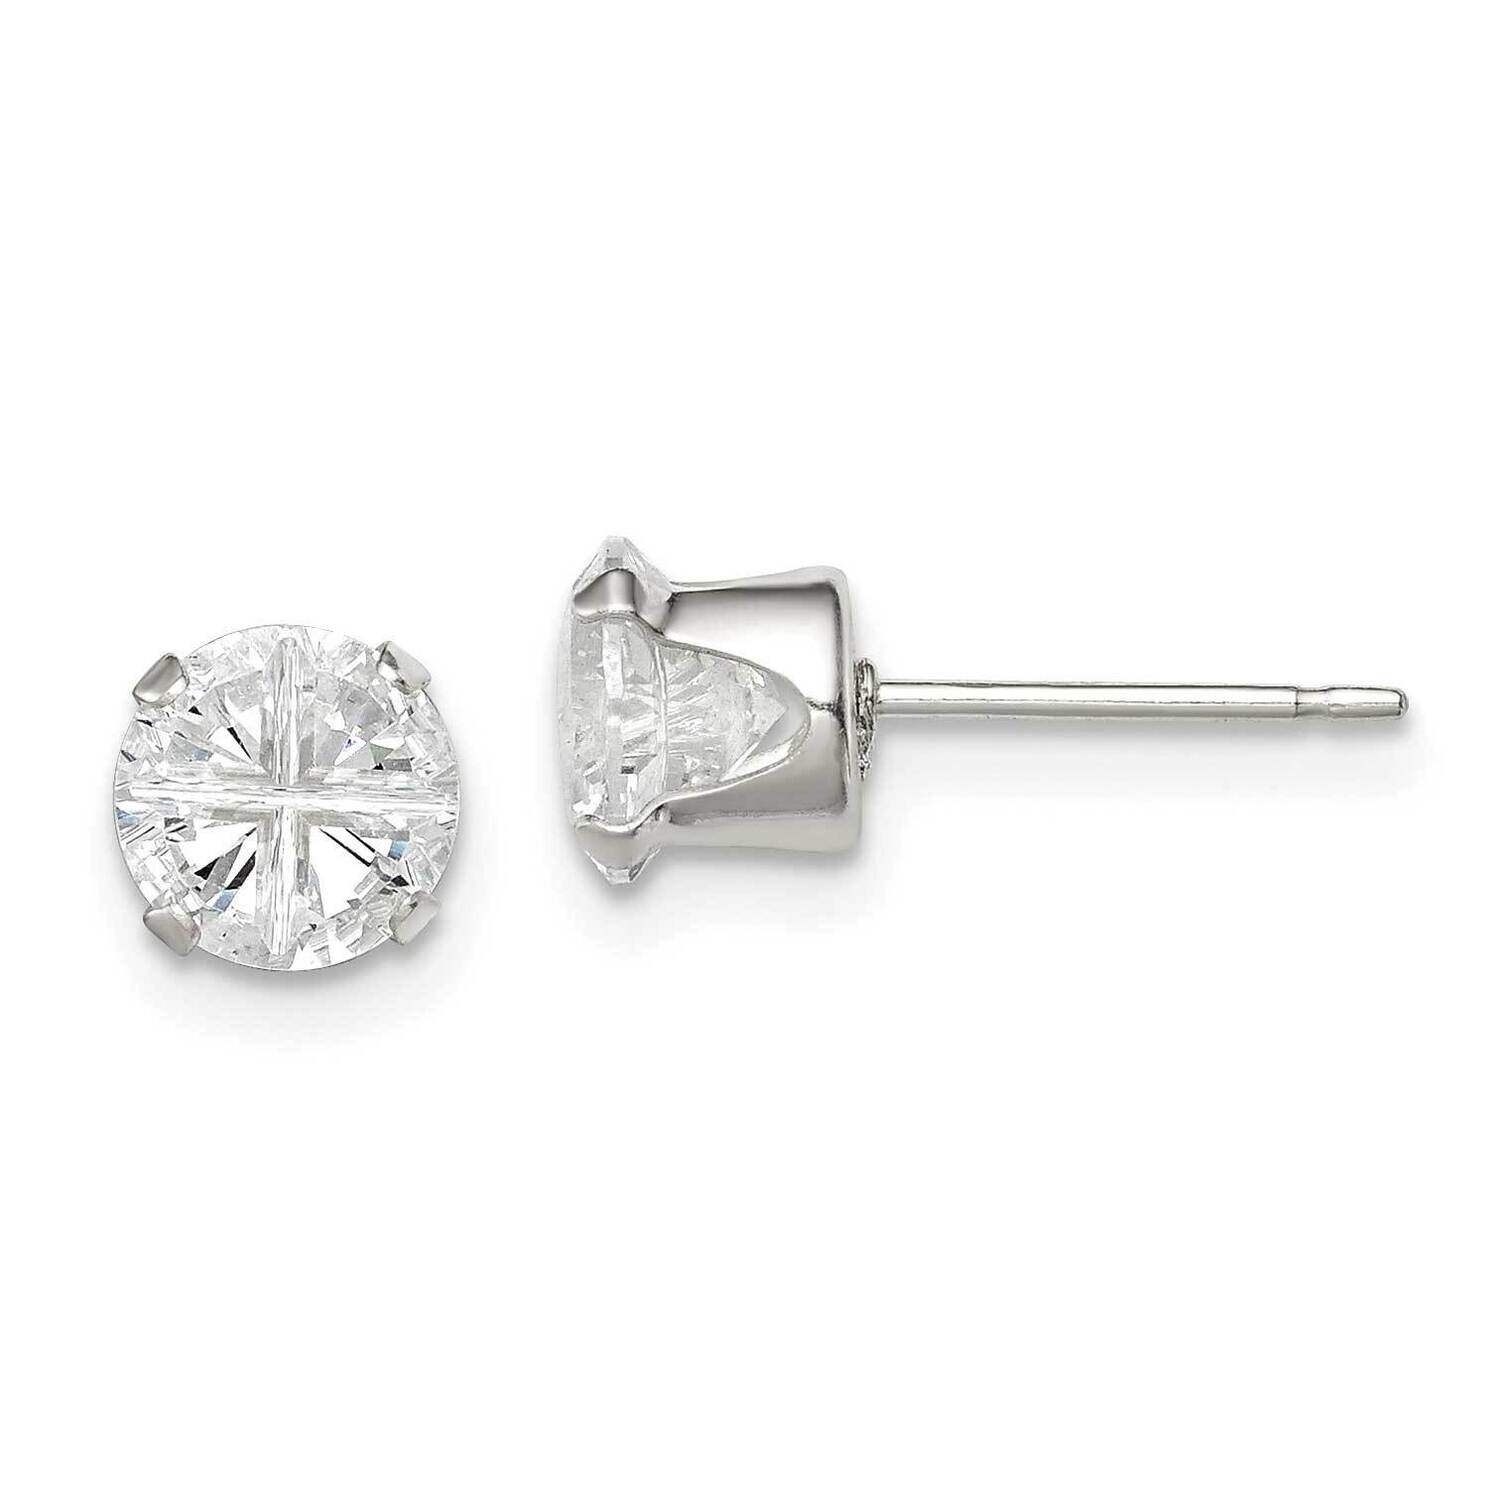 6mm Round 4 Prong Diamond Stud Earrings Sterling Silver QE7475